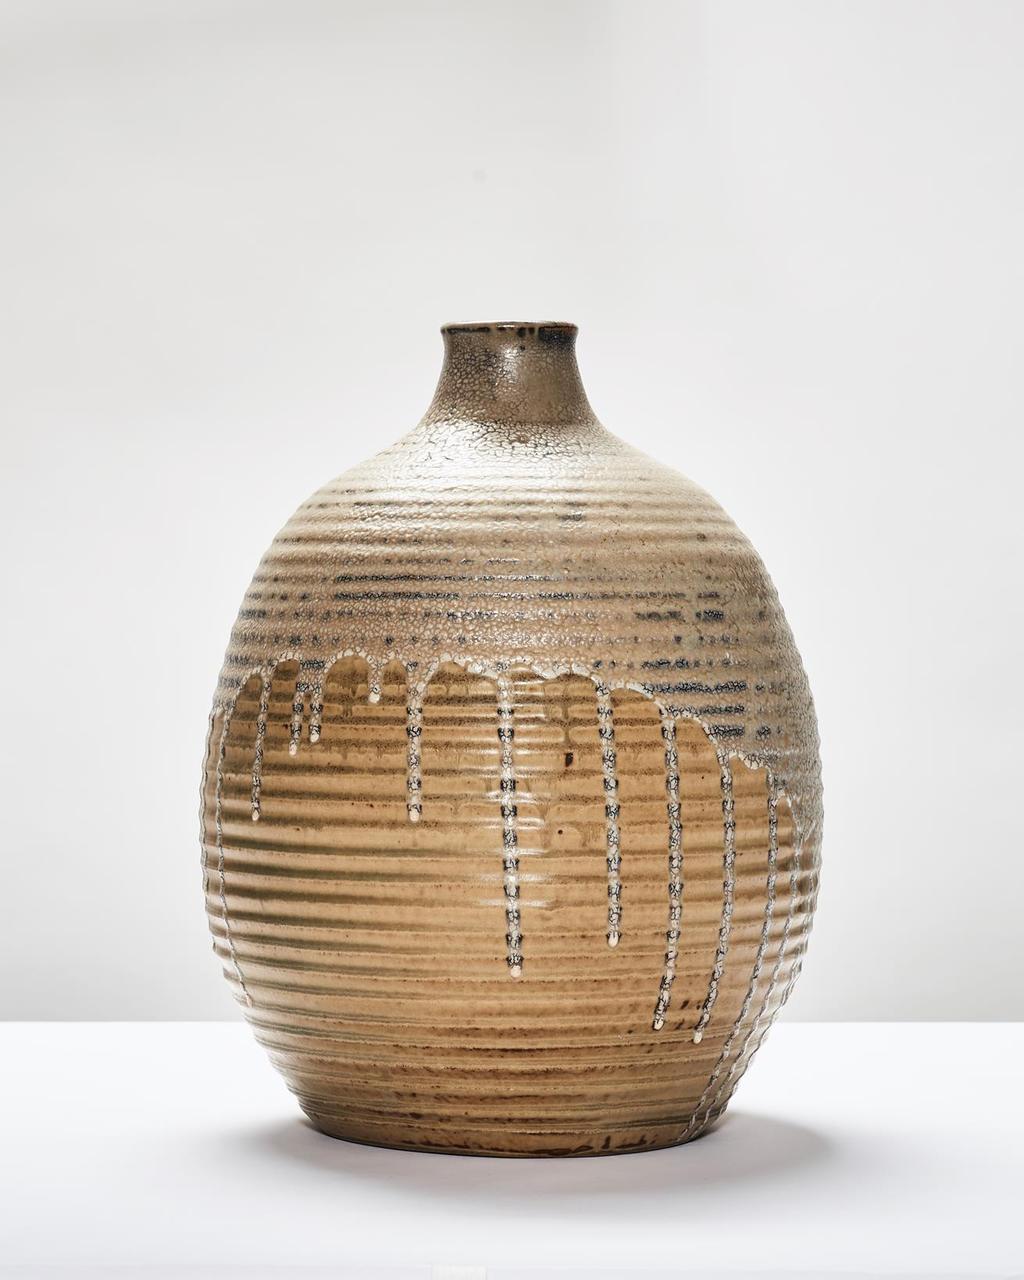 Japoniste stoneware that he produced in Saint Amand en Puisaye in the 1880s and the early 1890s.